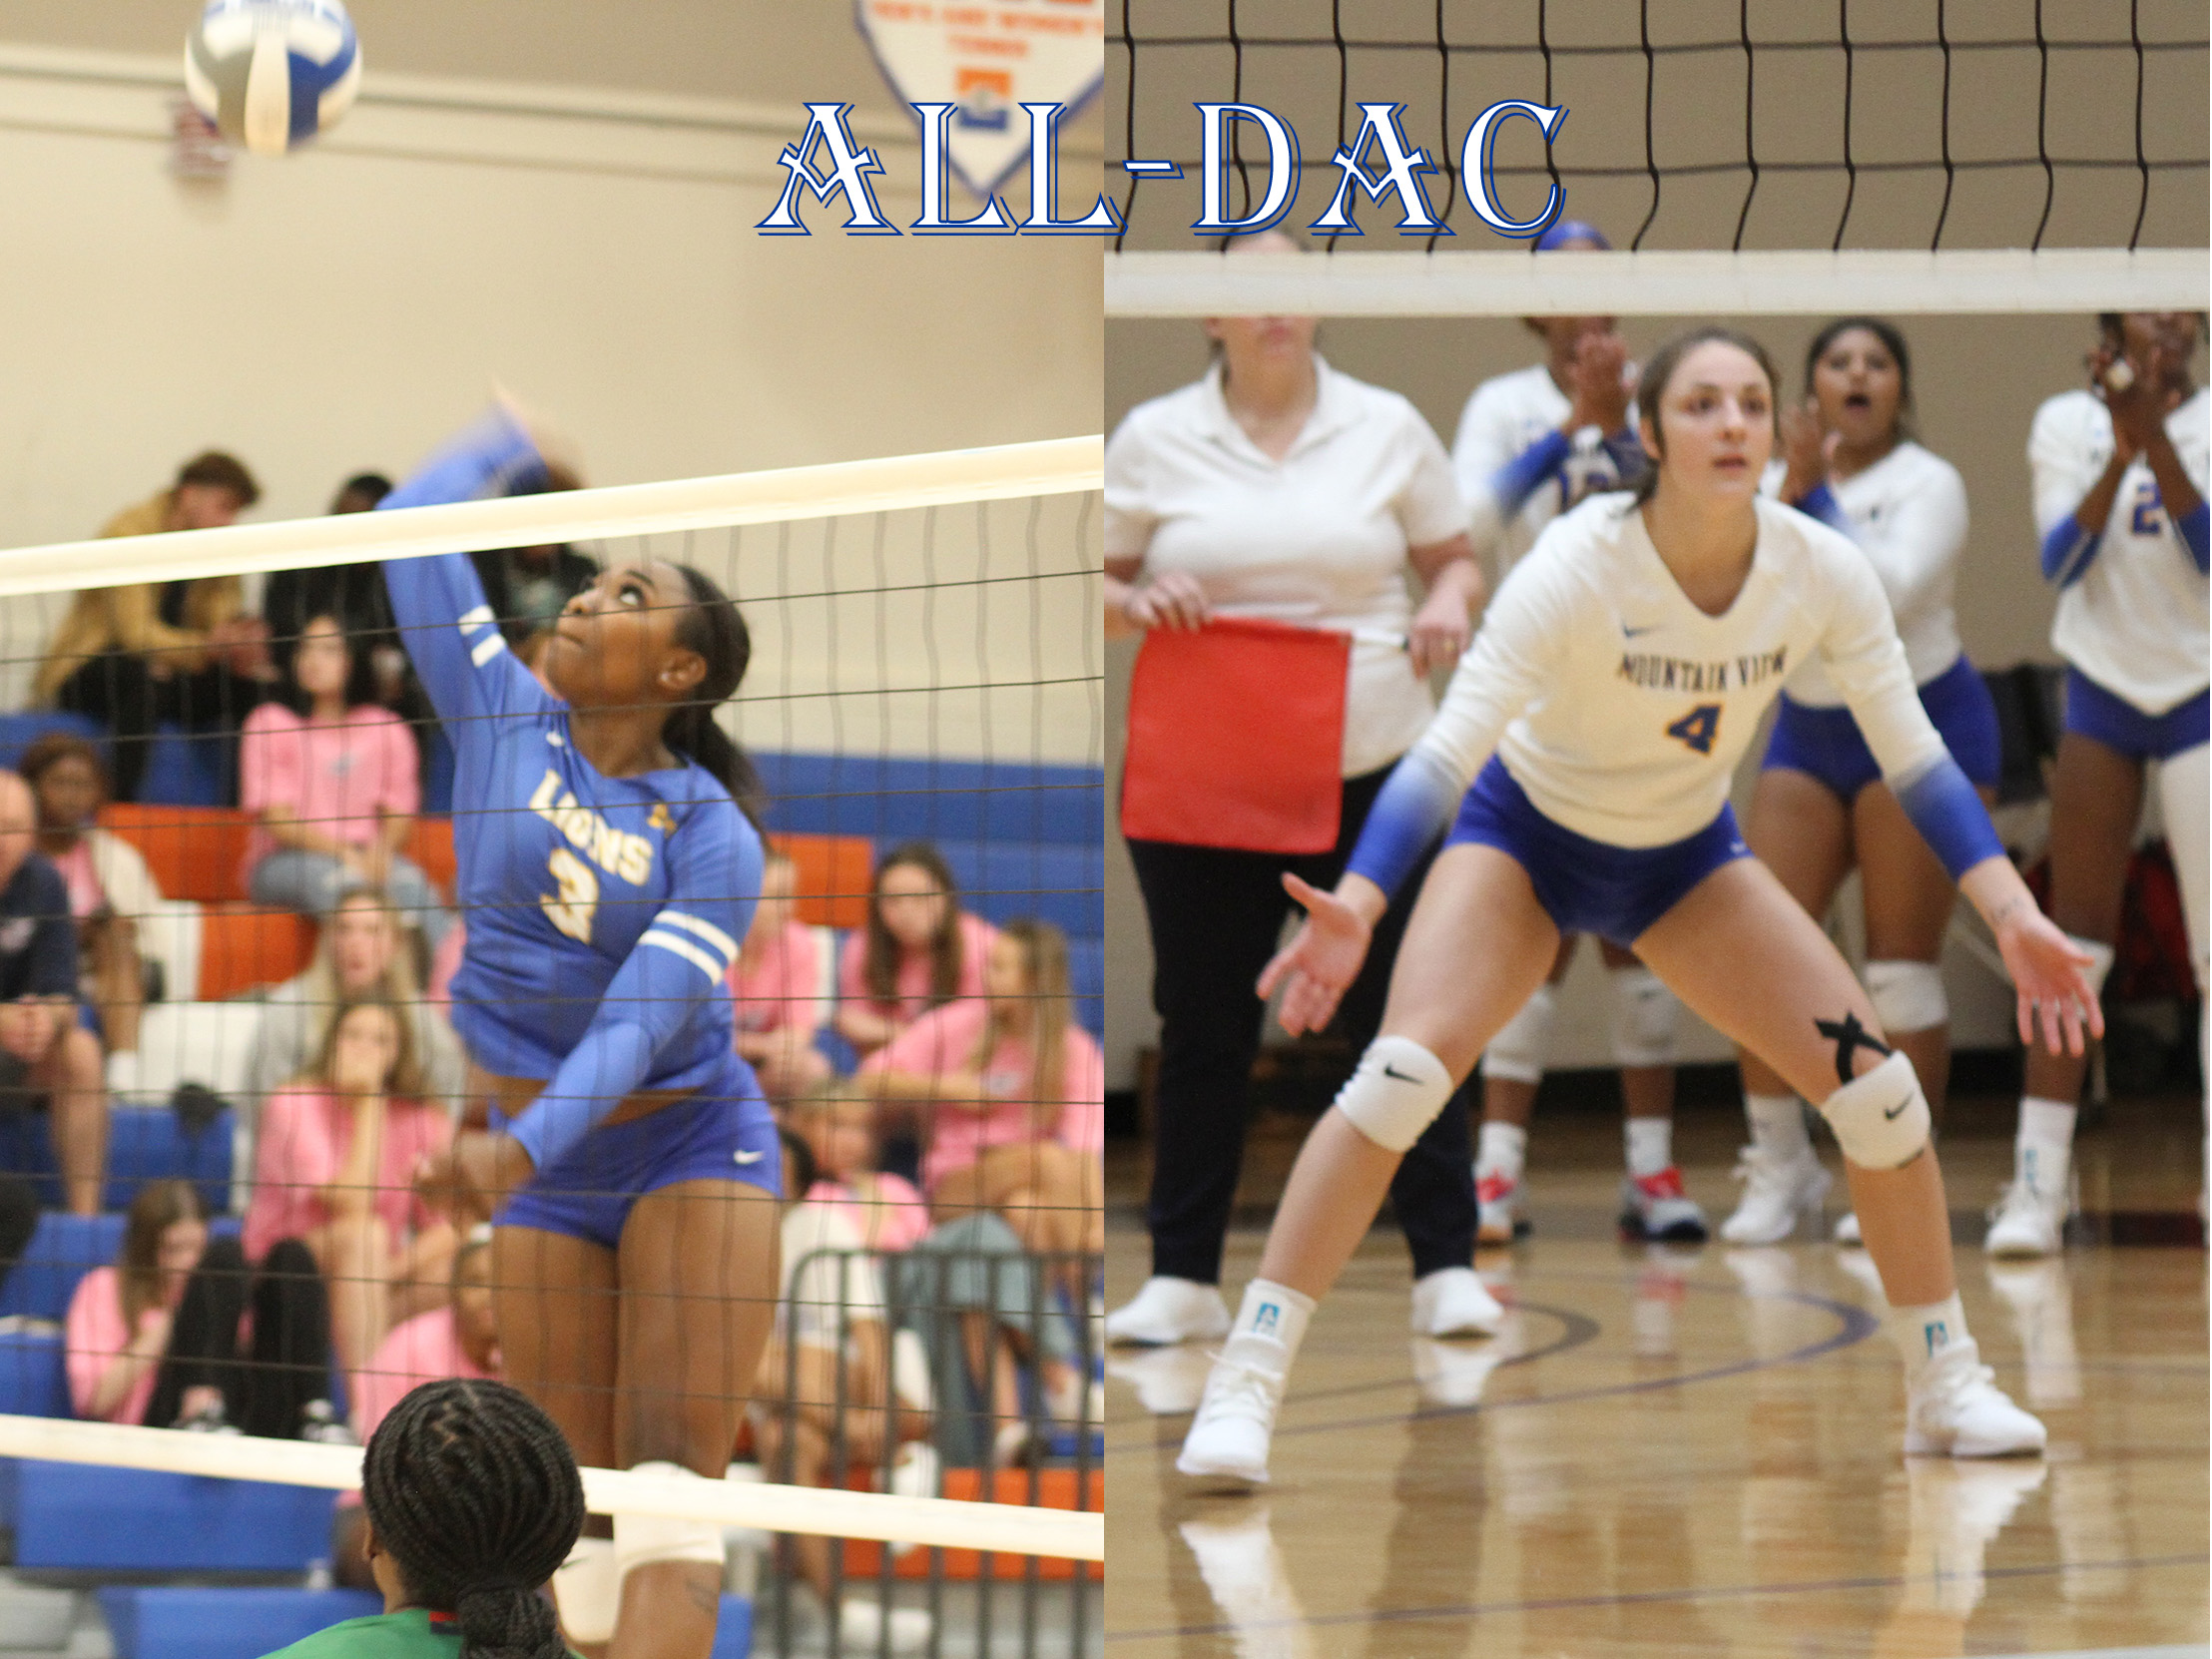 Seven Volleyball Players Earn All-DAC Awards